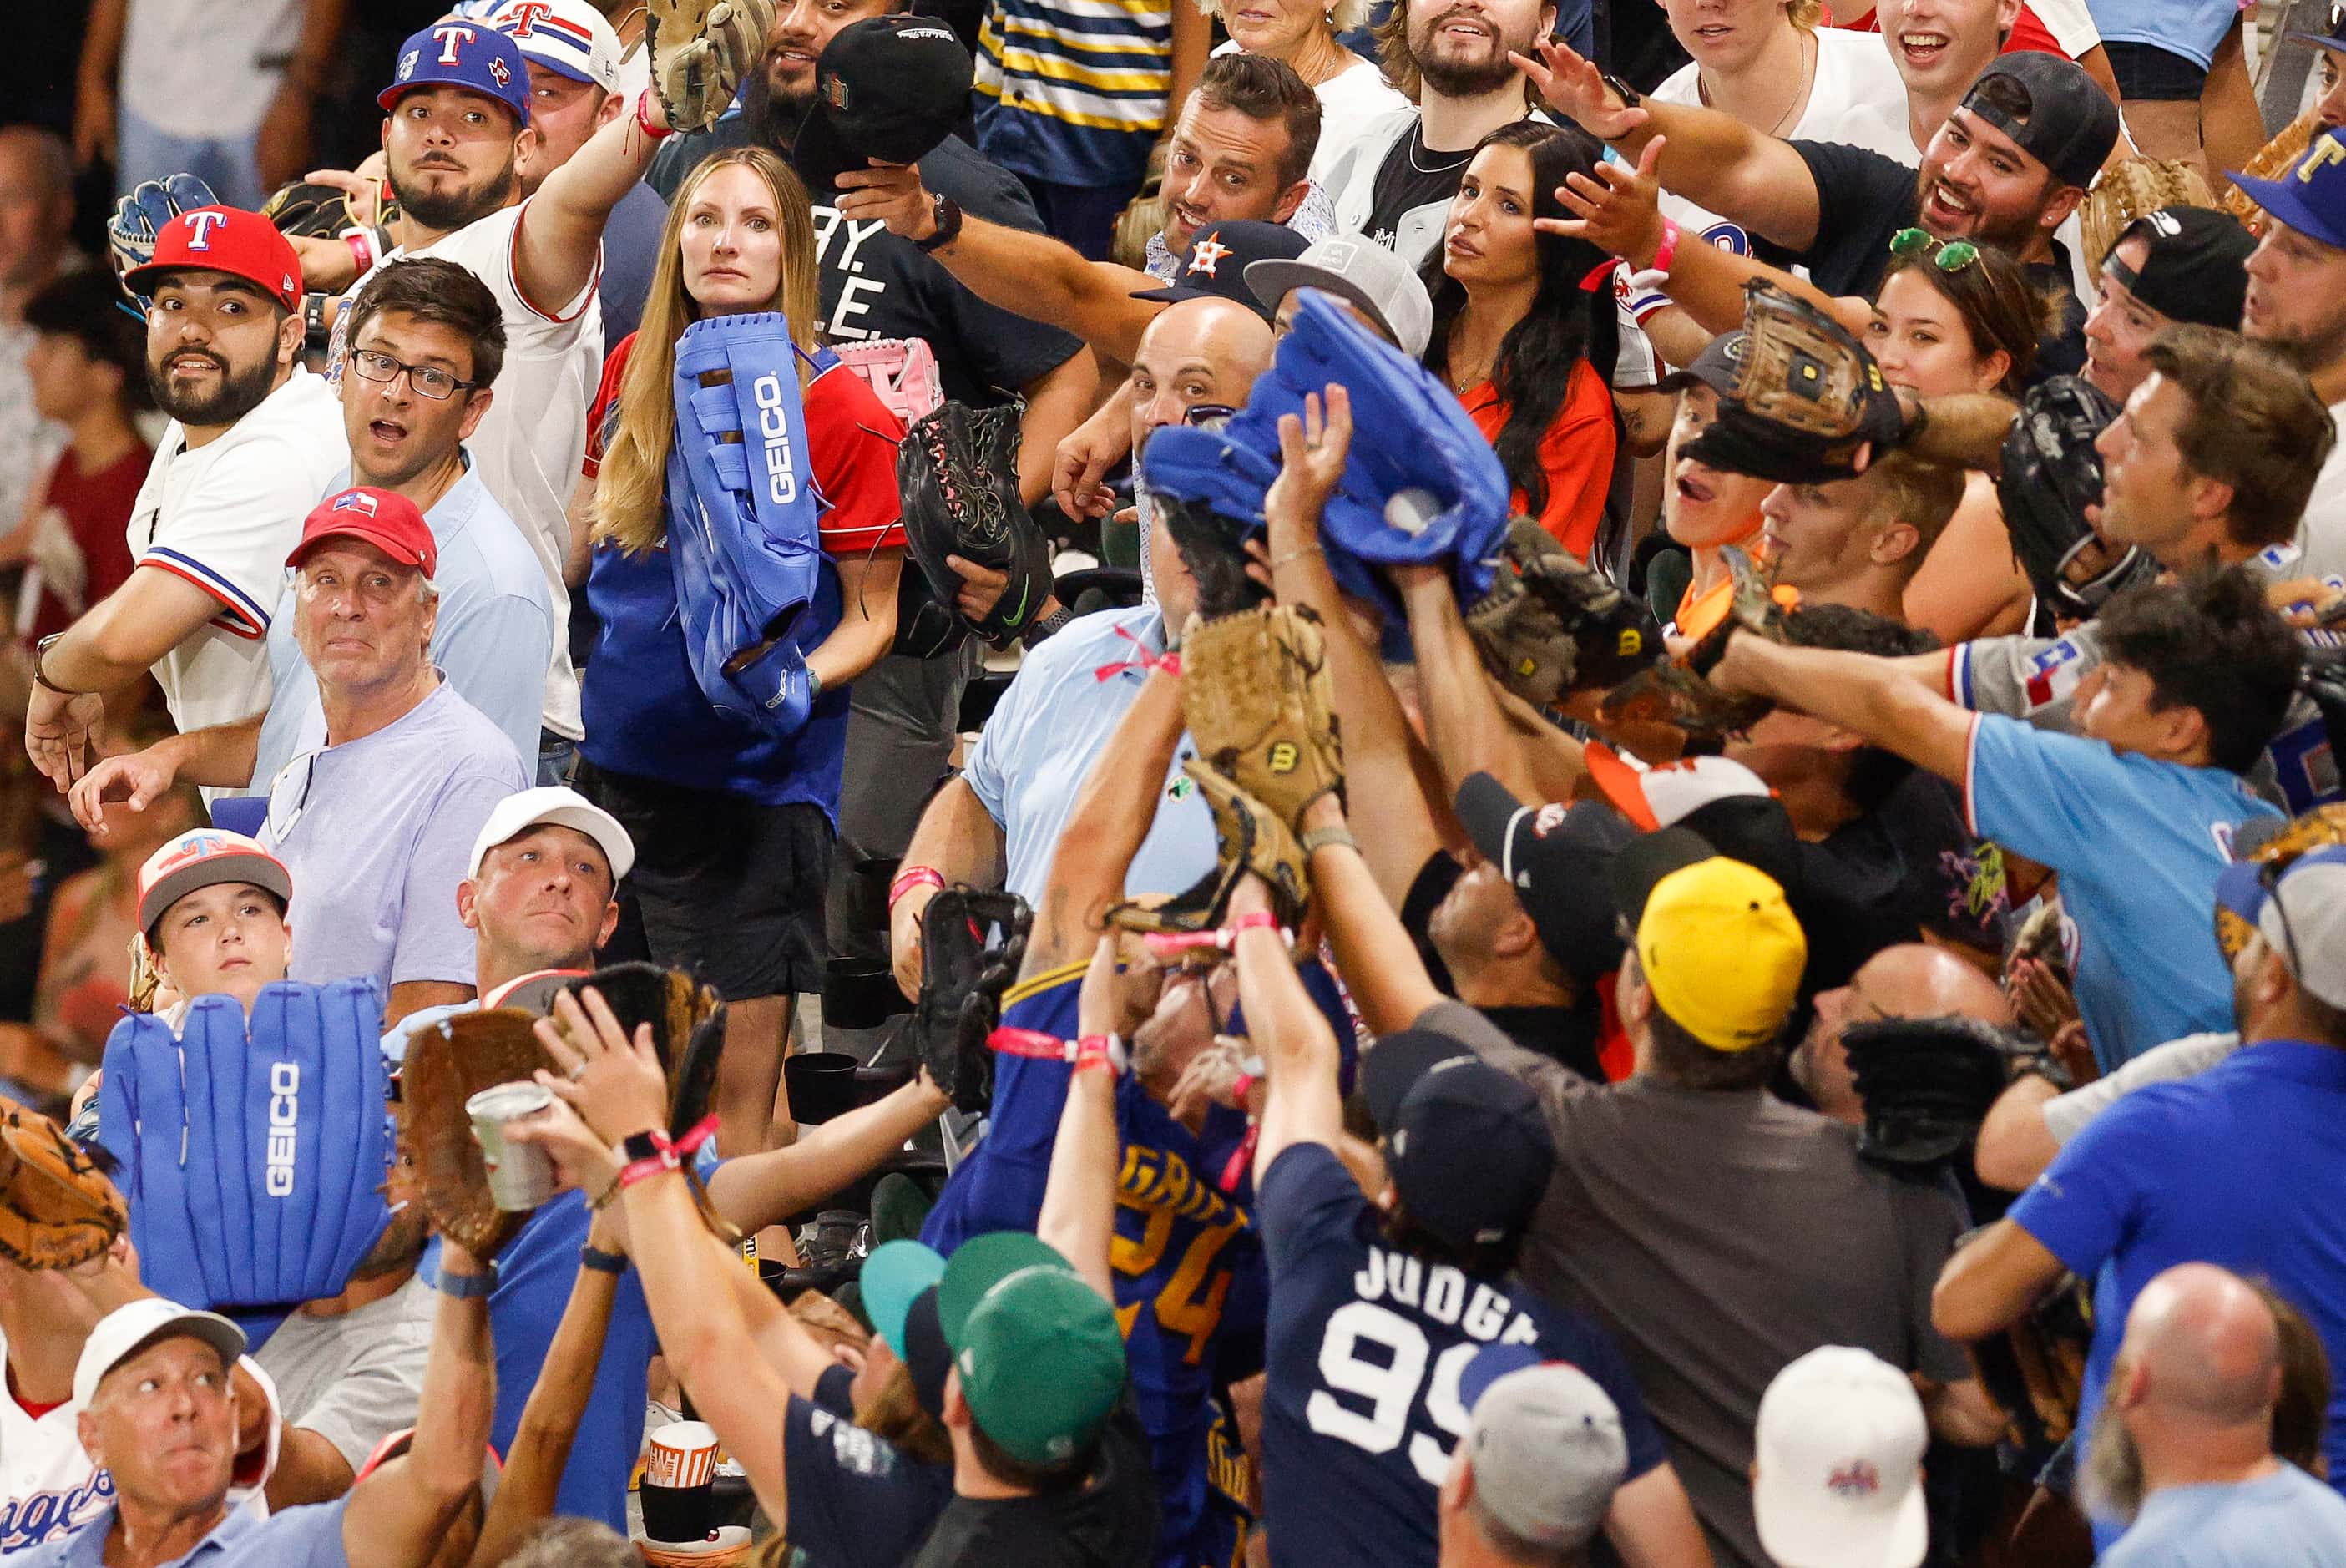 A fan with a large blue glove reaches up to snag a home run ball hit by National League's...